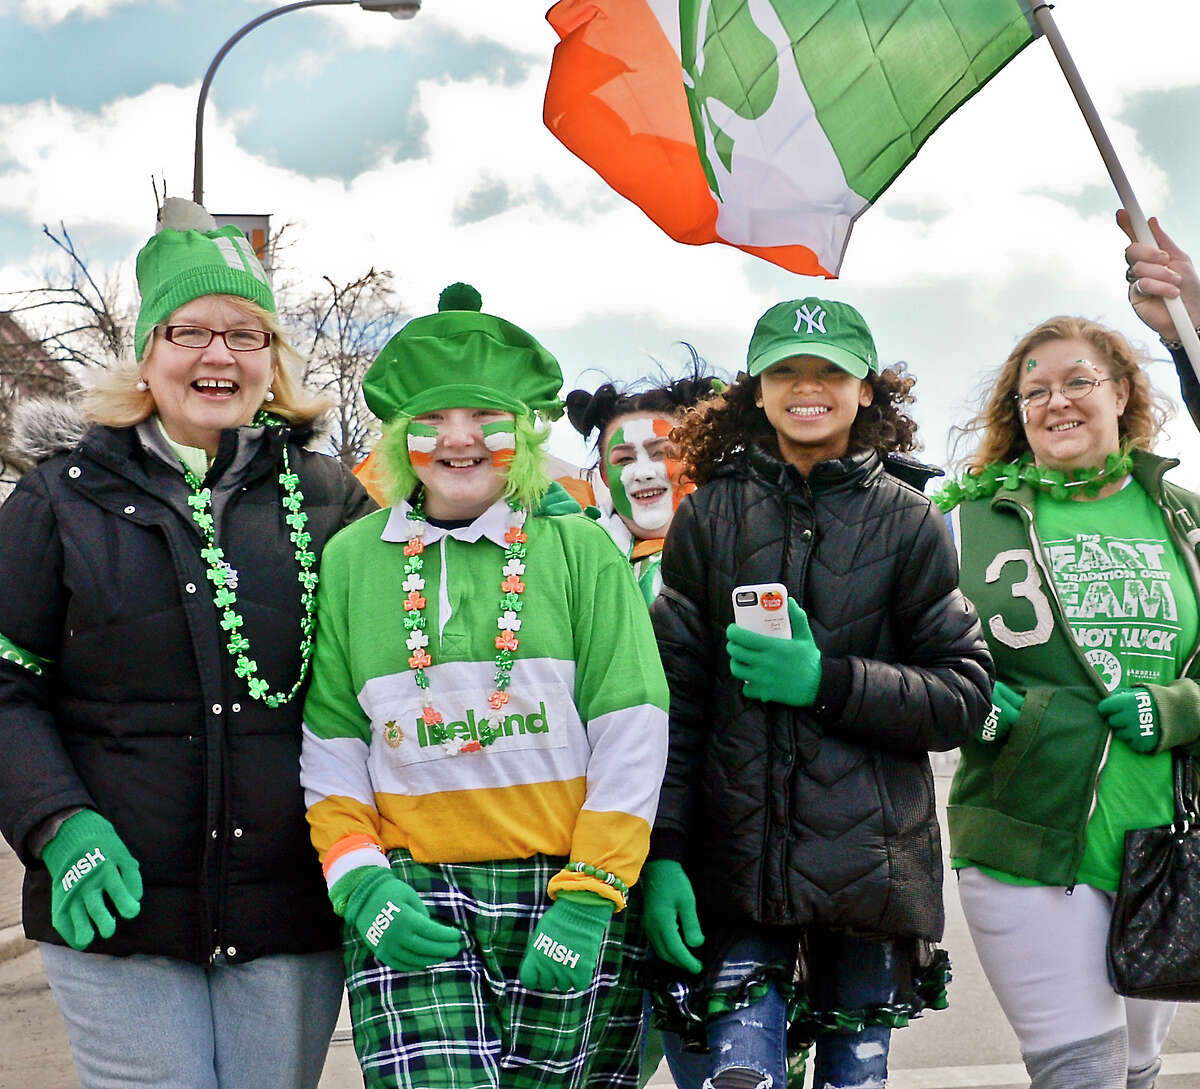 Dressed for the occasion, from left, Joellen Reynolds, Jersey Reynolds, 11, Destiny Reynolds, 18, Shellie Bryant, 11, and Christine Hart, all of Clifton Park, arrive for the 68th Annual Albany St. Patrick's Day Parade Saturday March 17, 2018 in Albany, NY. (John Carl D'Annibale/Times Union)